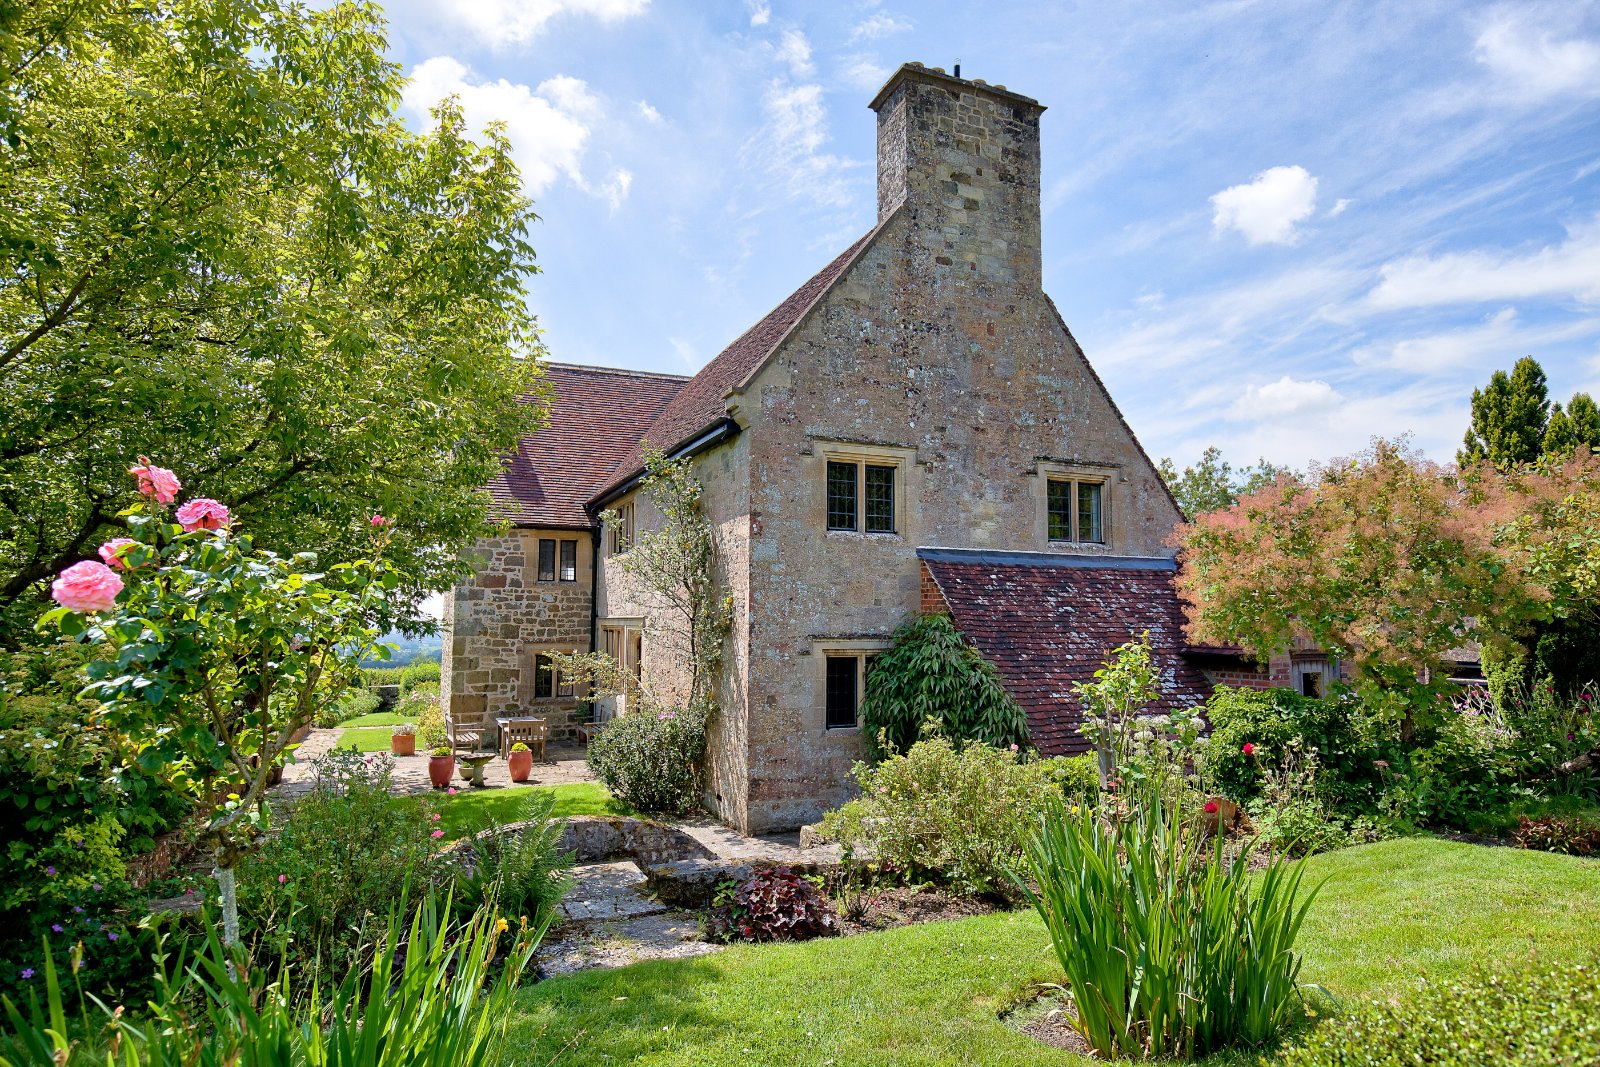 An Utterly Charming Old Rectory In The Village Where Sir Christopher Wren Grew Up